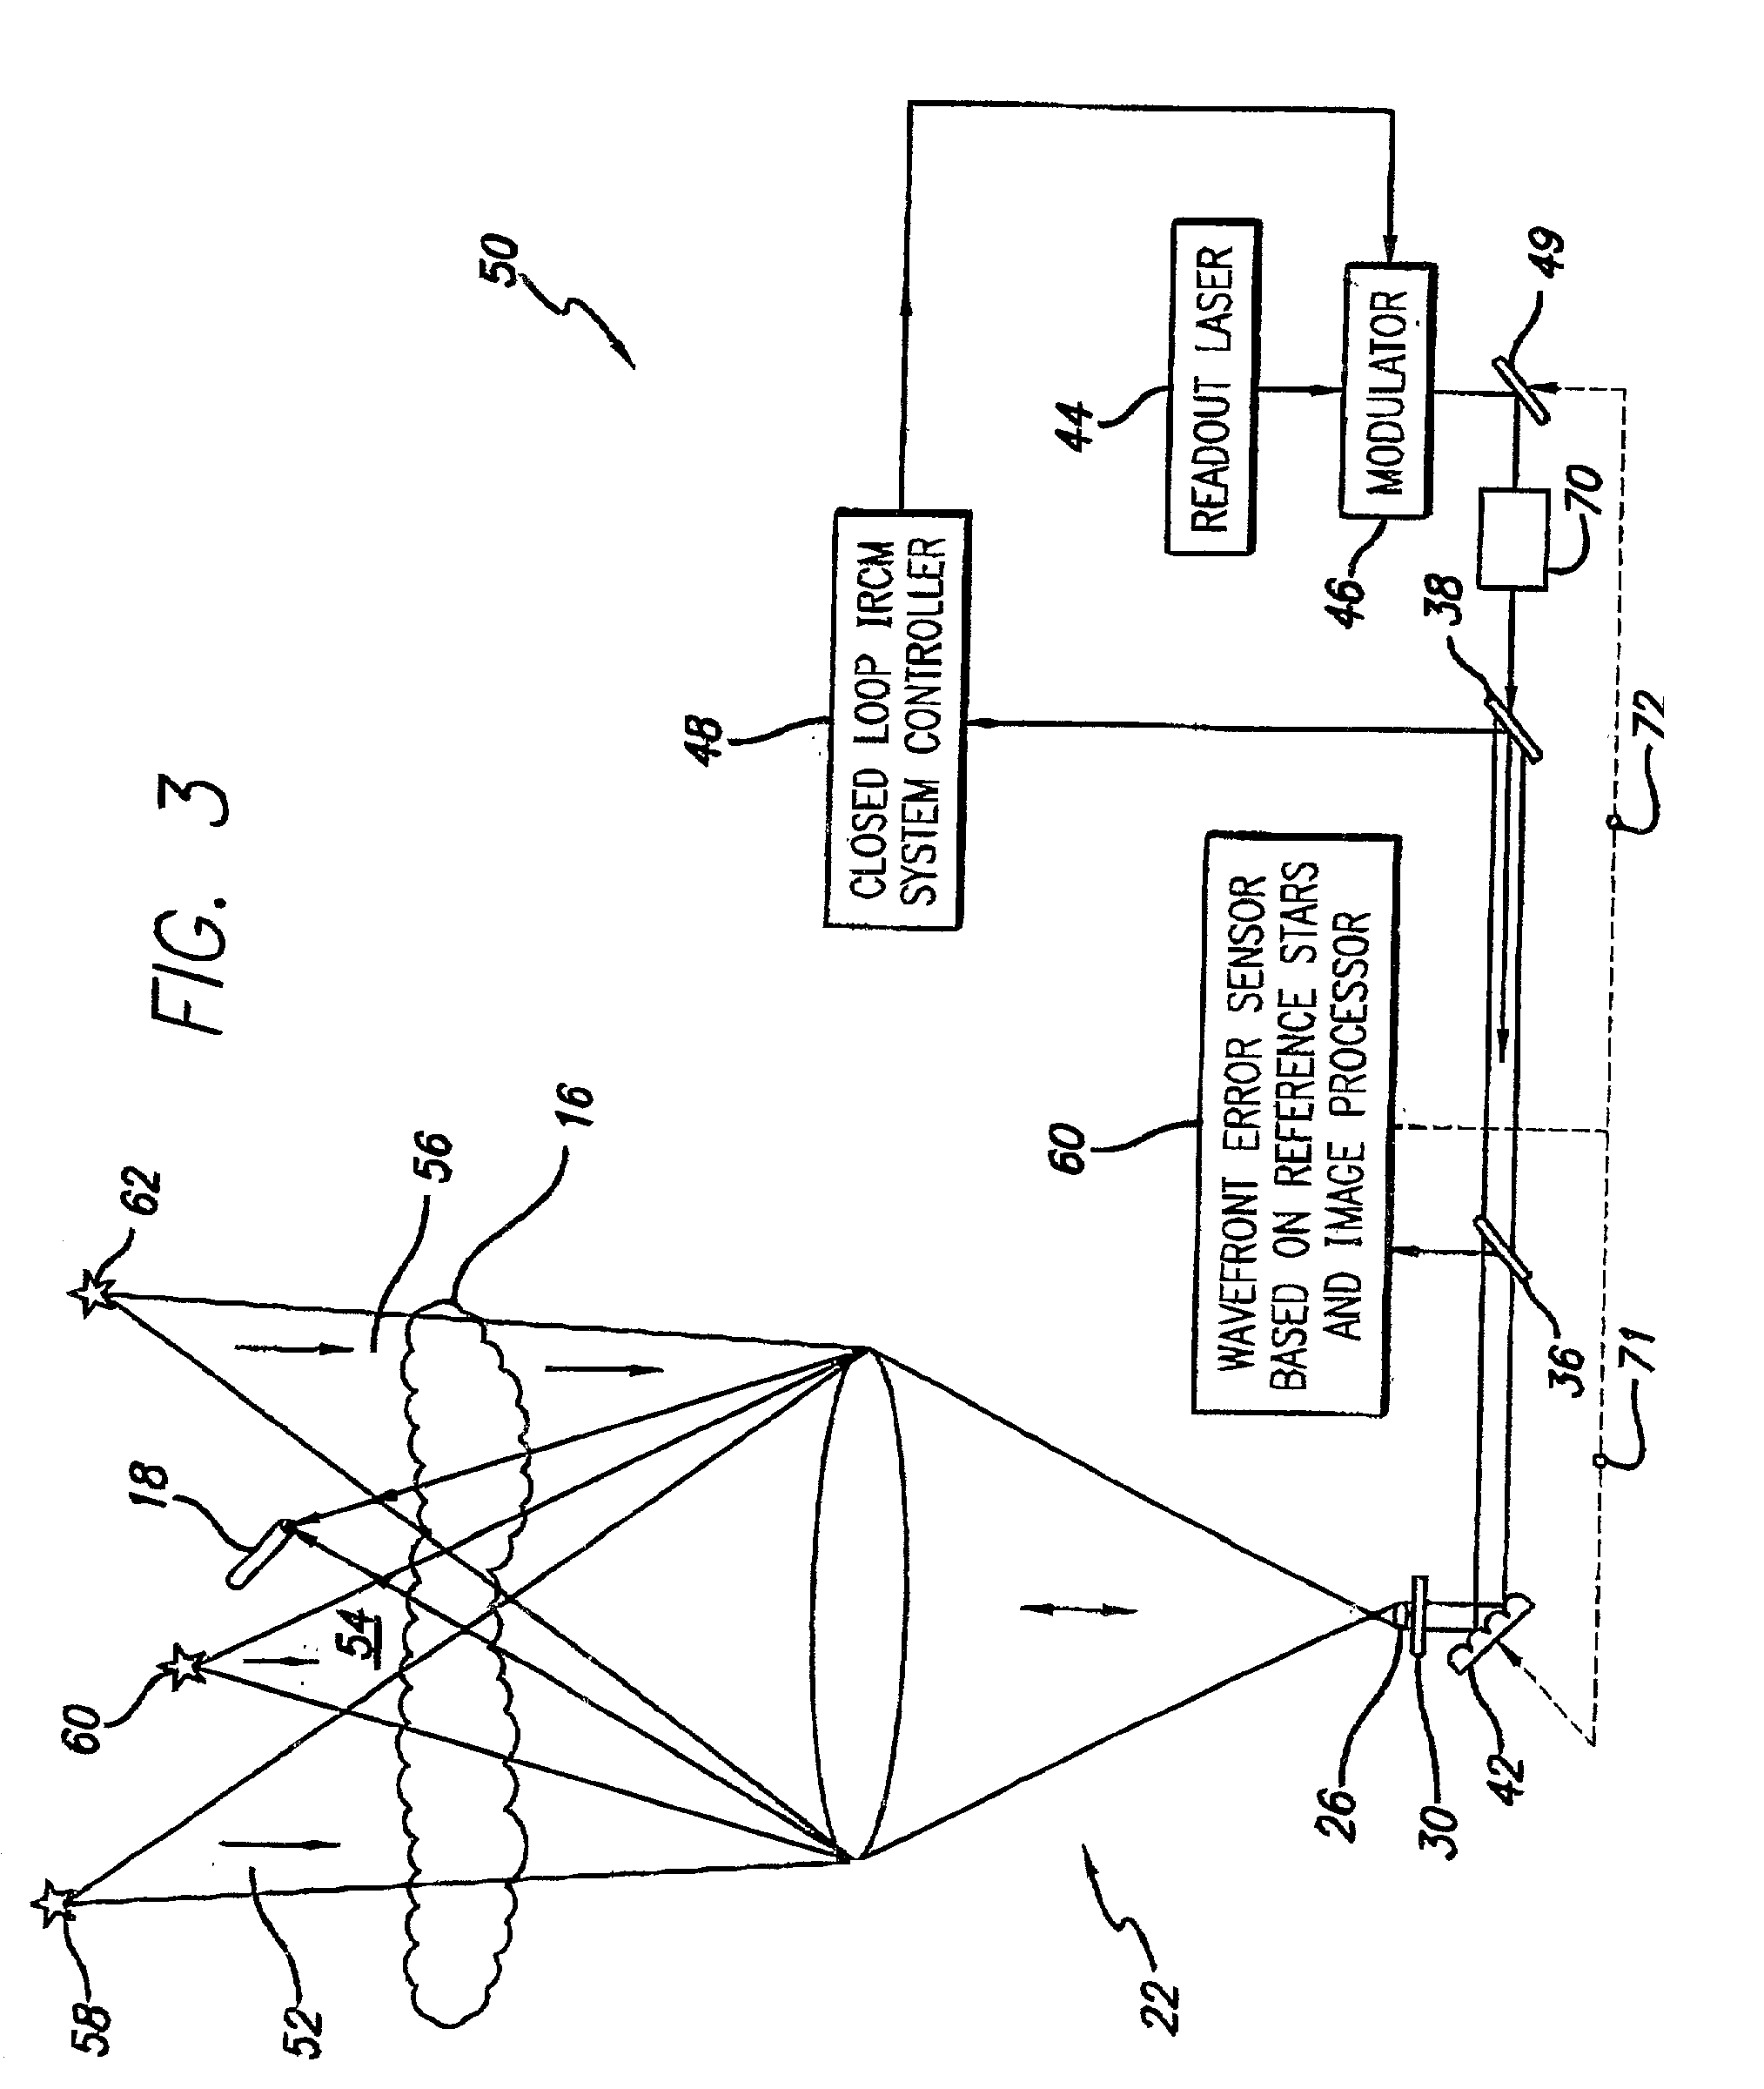 Robust infrared countermeasure system and method